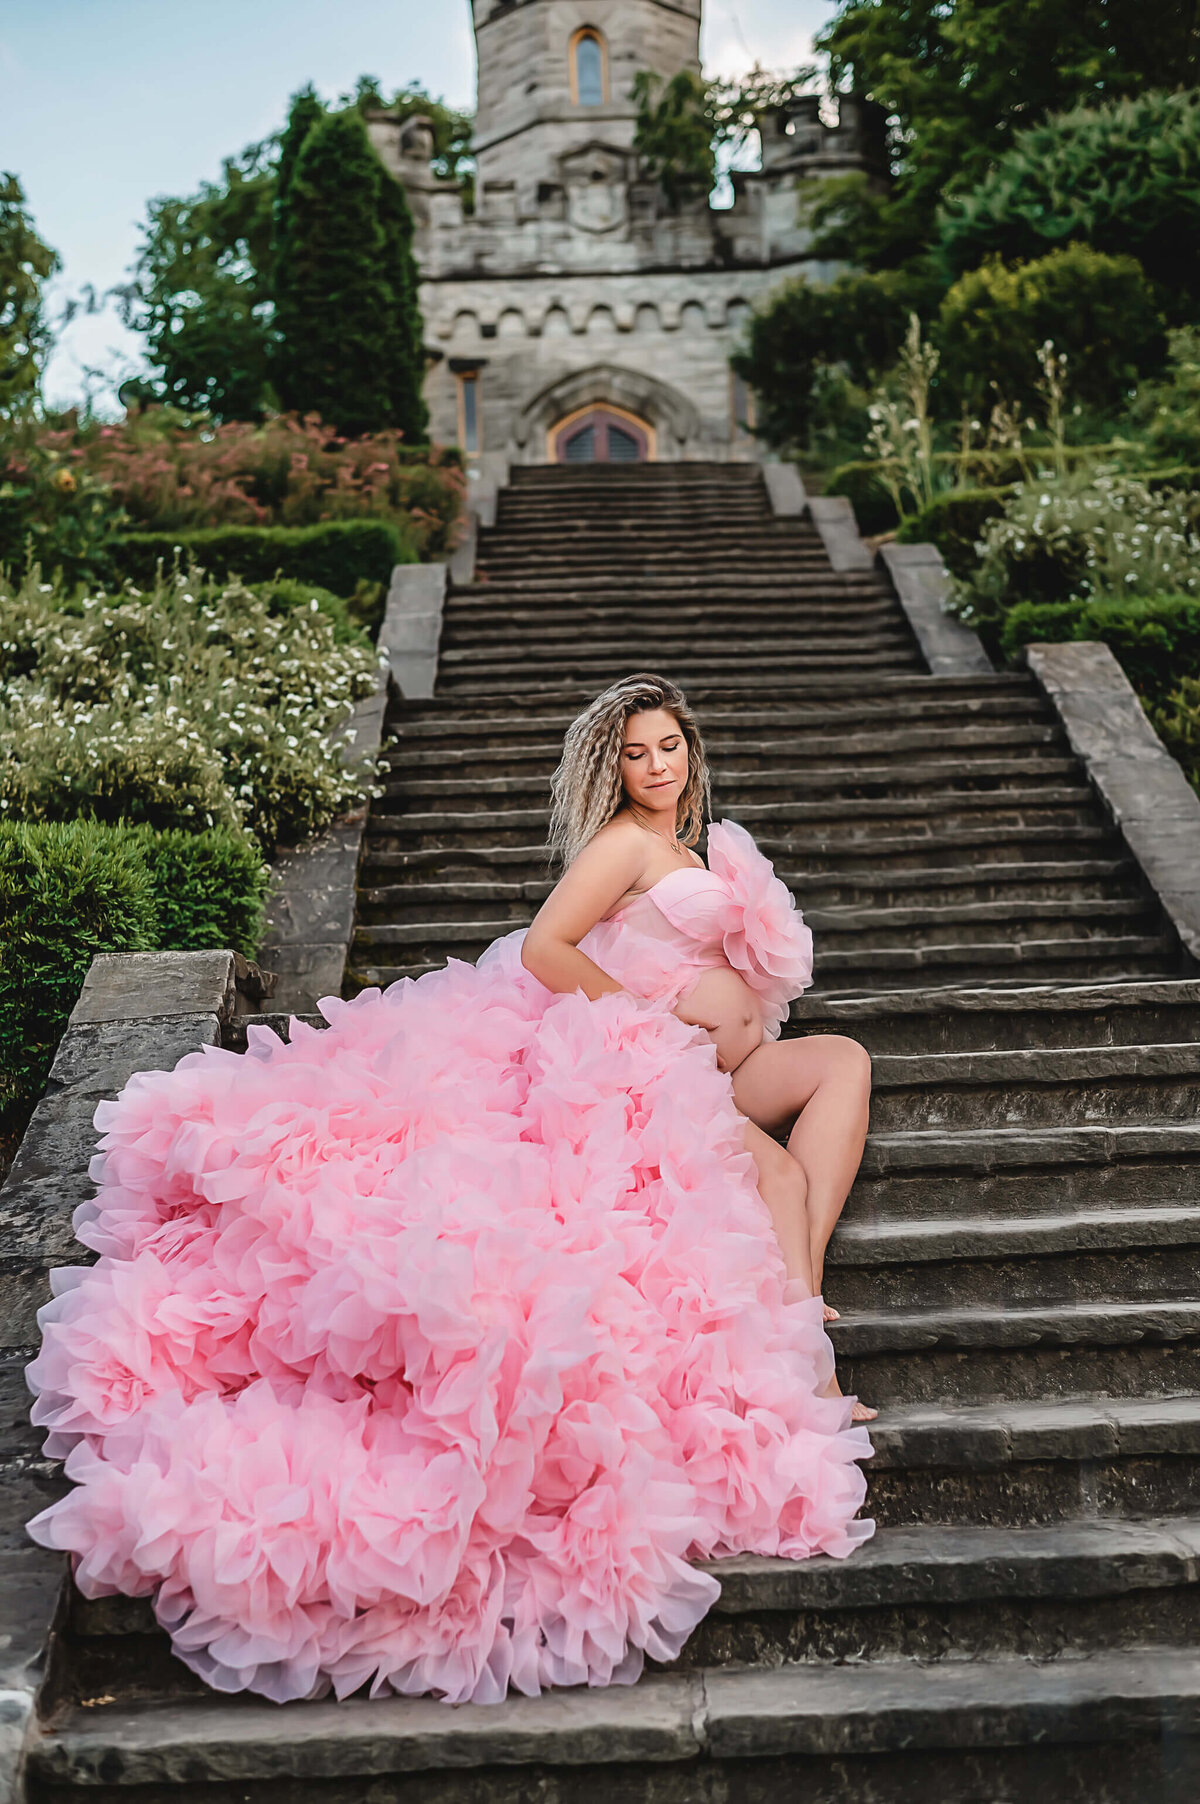 Greater Toronto Maternity Photography at Battlefiield Park, expectant mom in pink gown with ruffles sitting on a stair case.